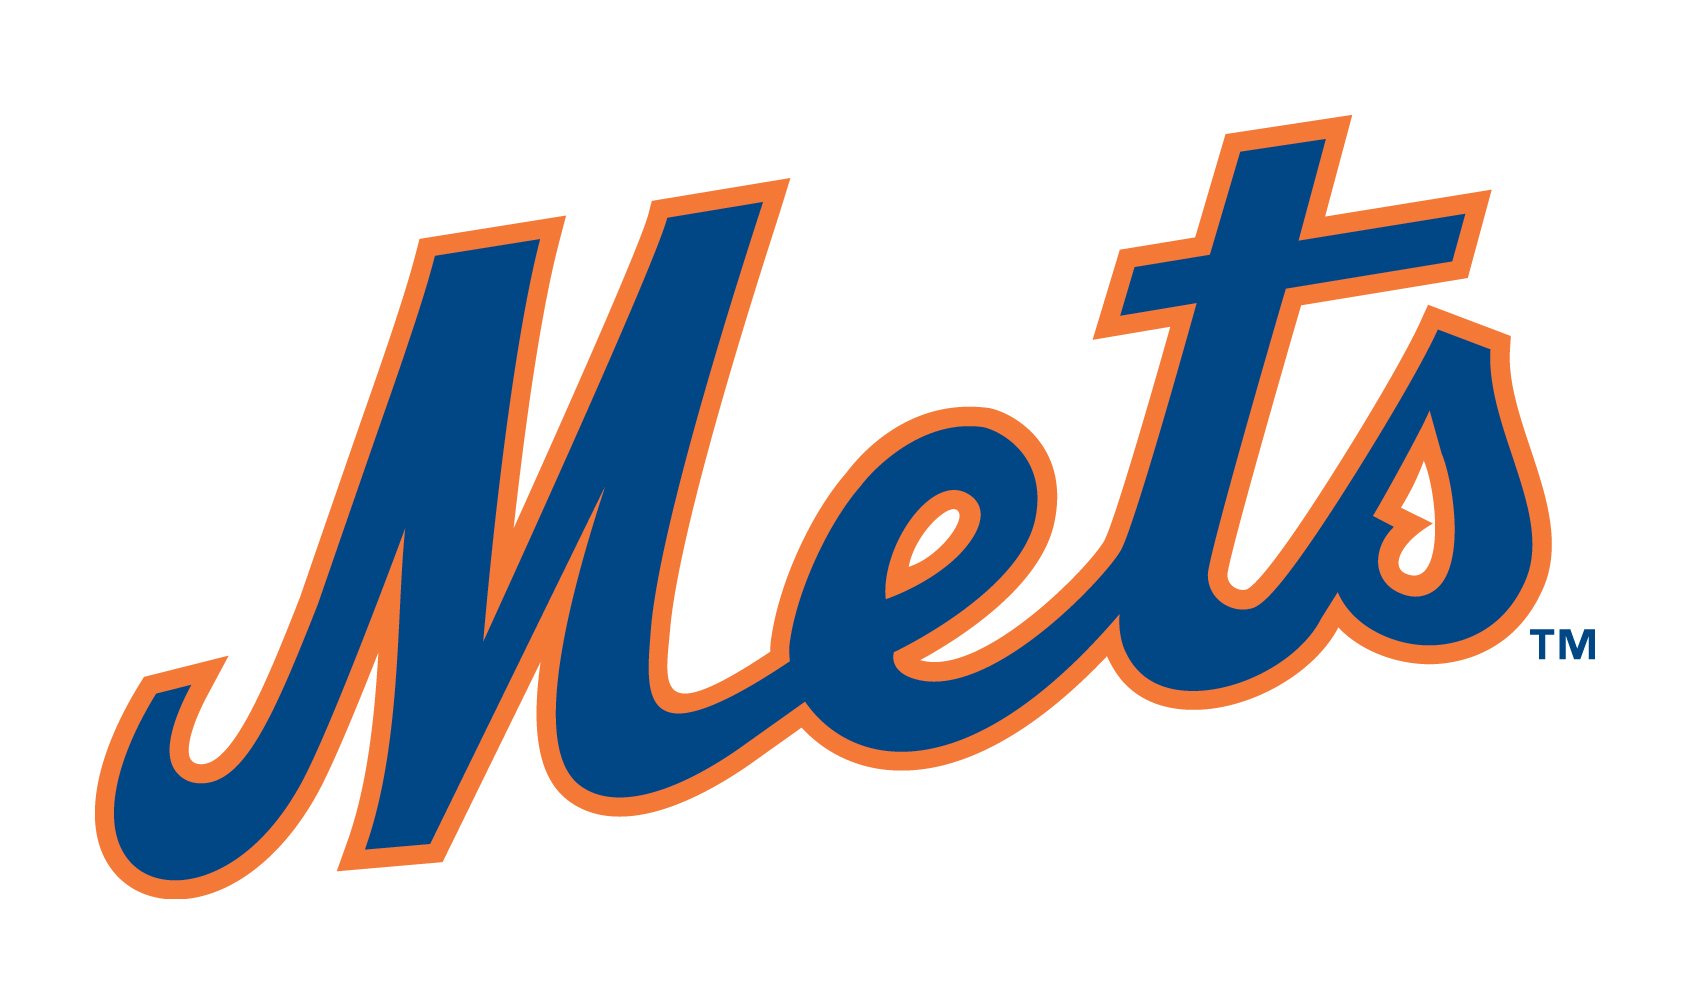 New York Mets Logo Design – History, Meaning and Evolution